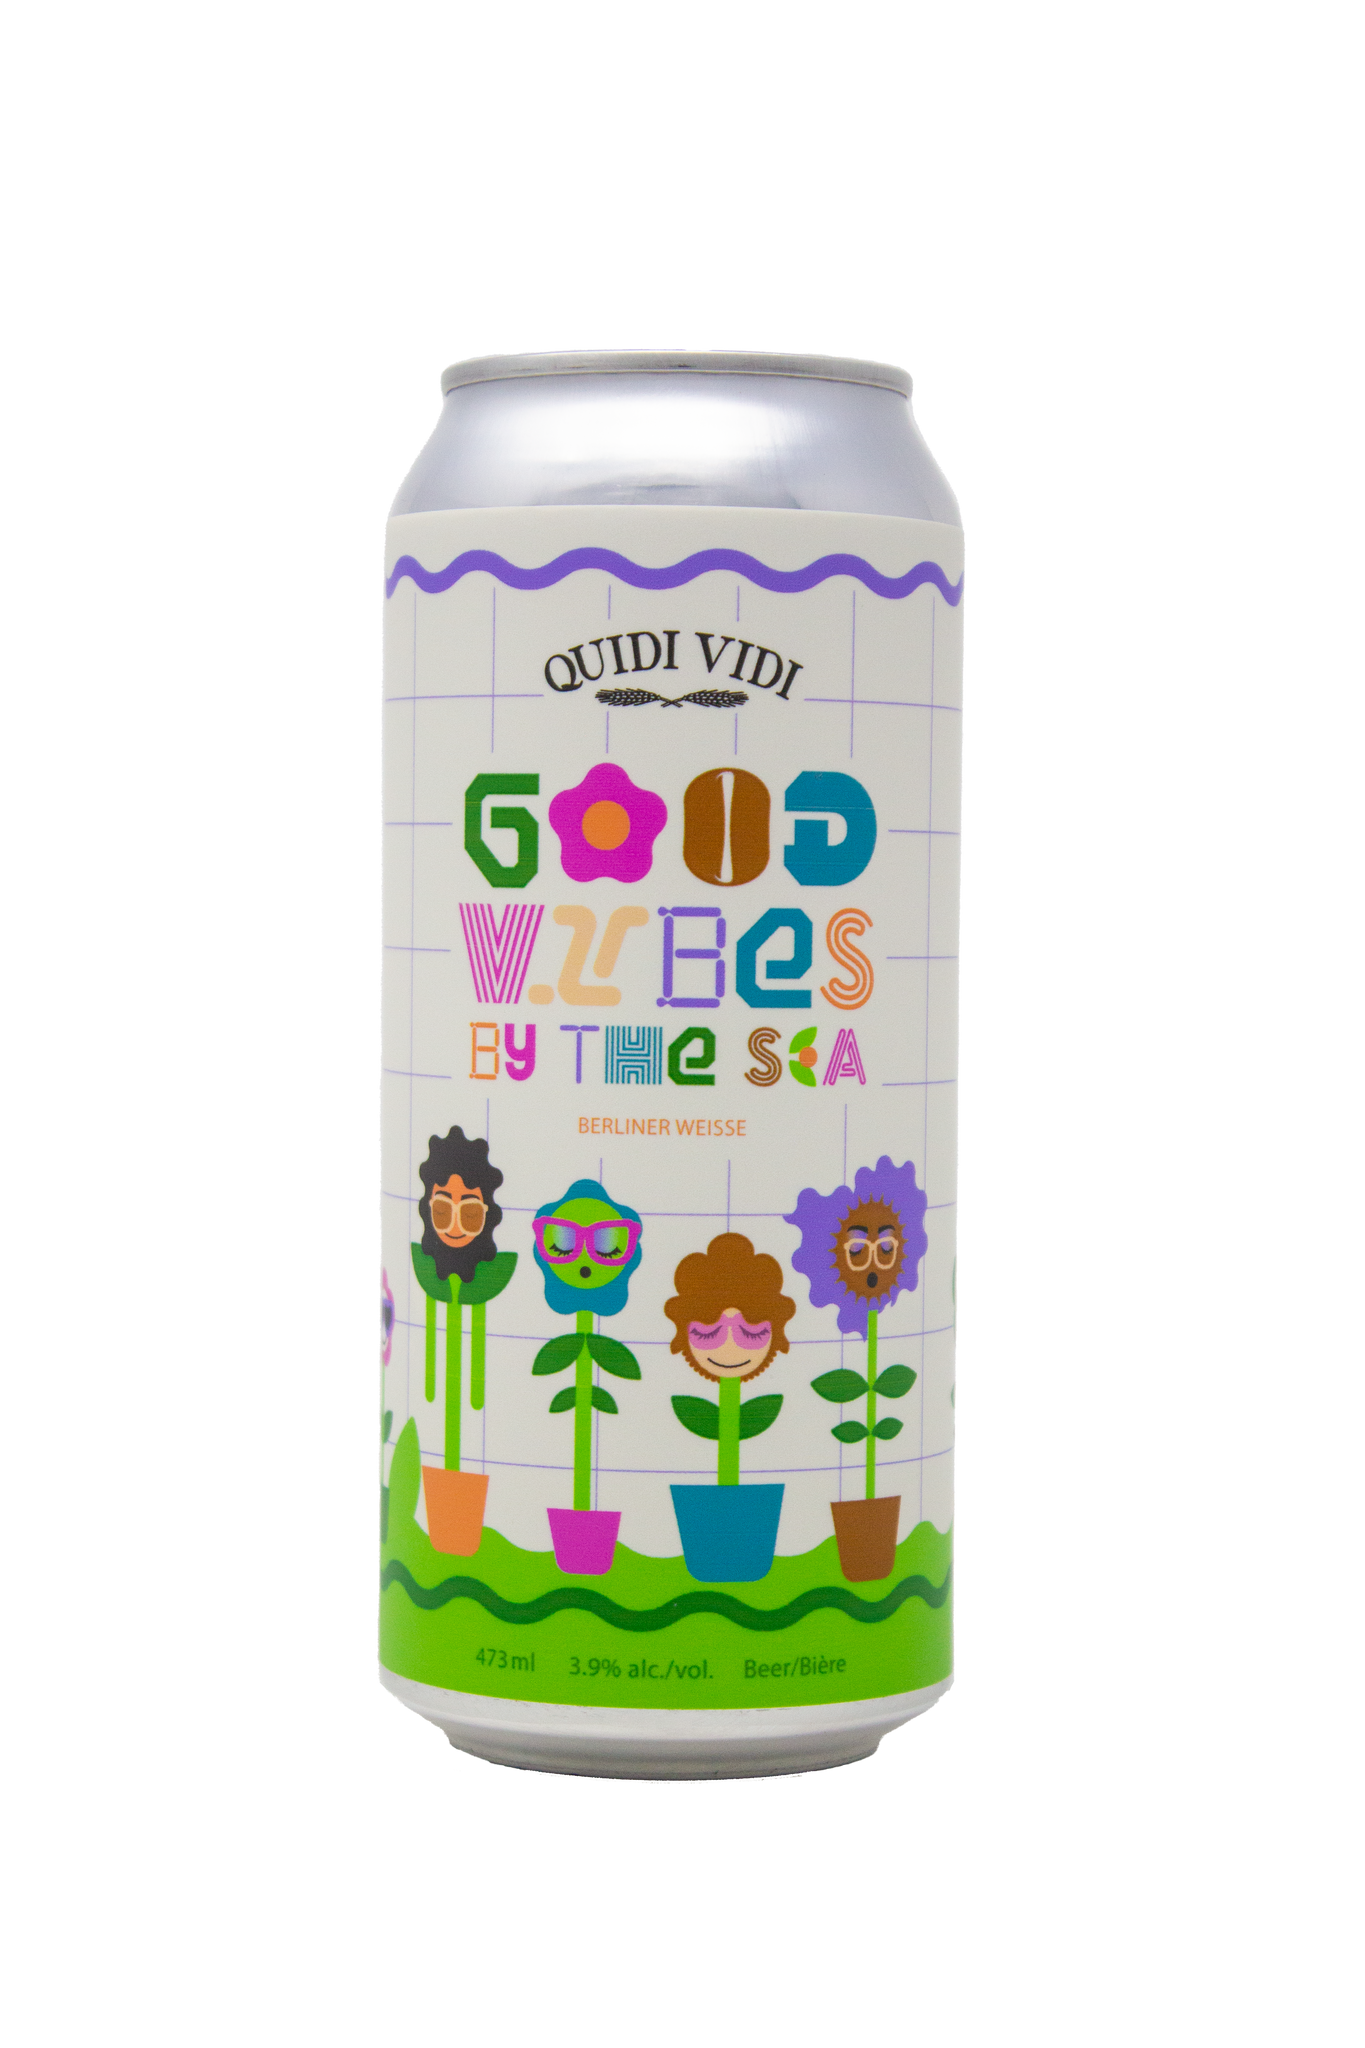 Good Vibes by the Sea 473mL Can